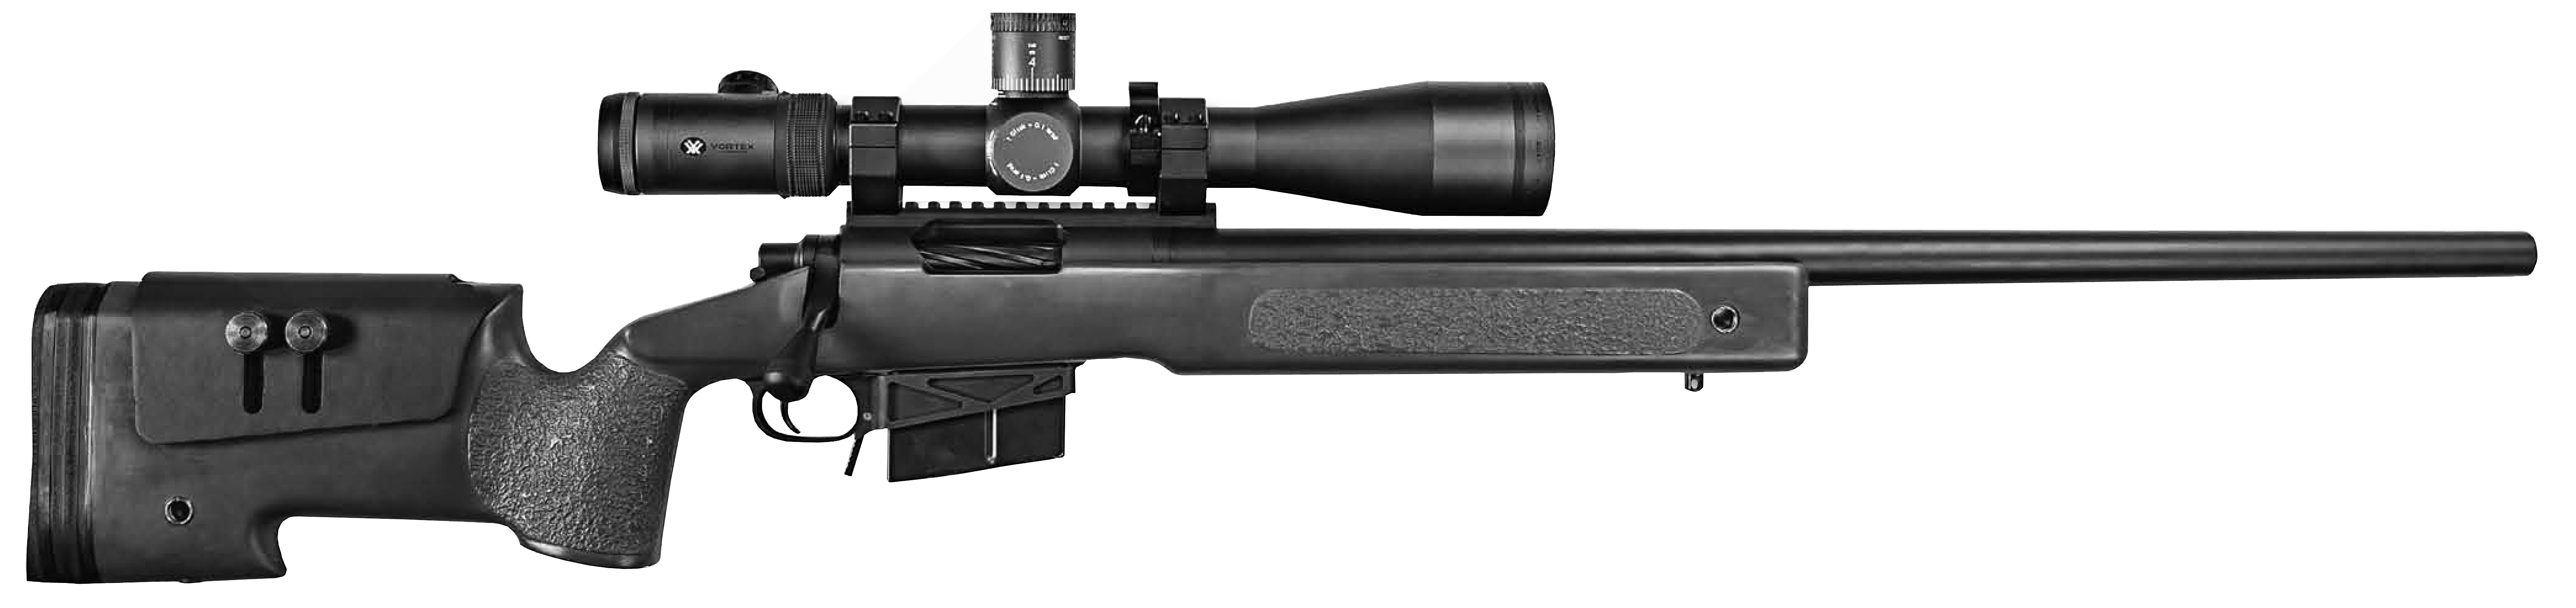 BCR-19 Tactical Rifle